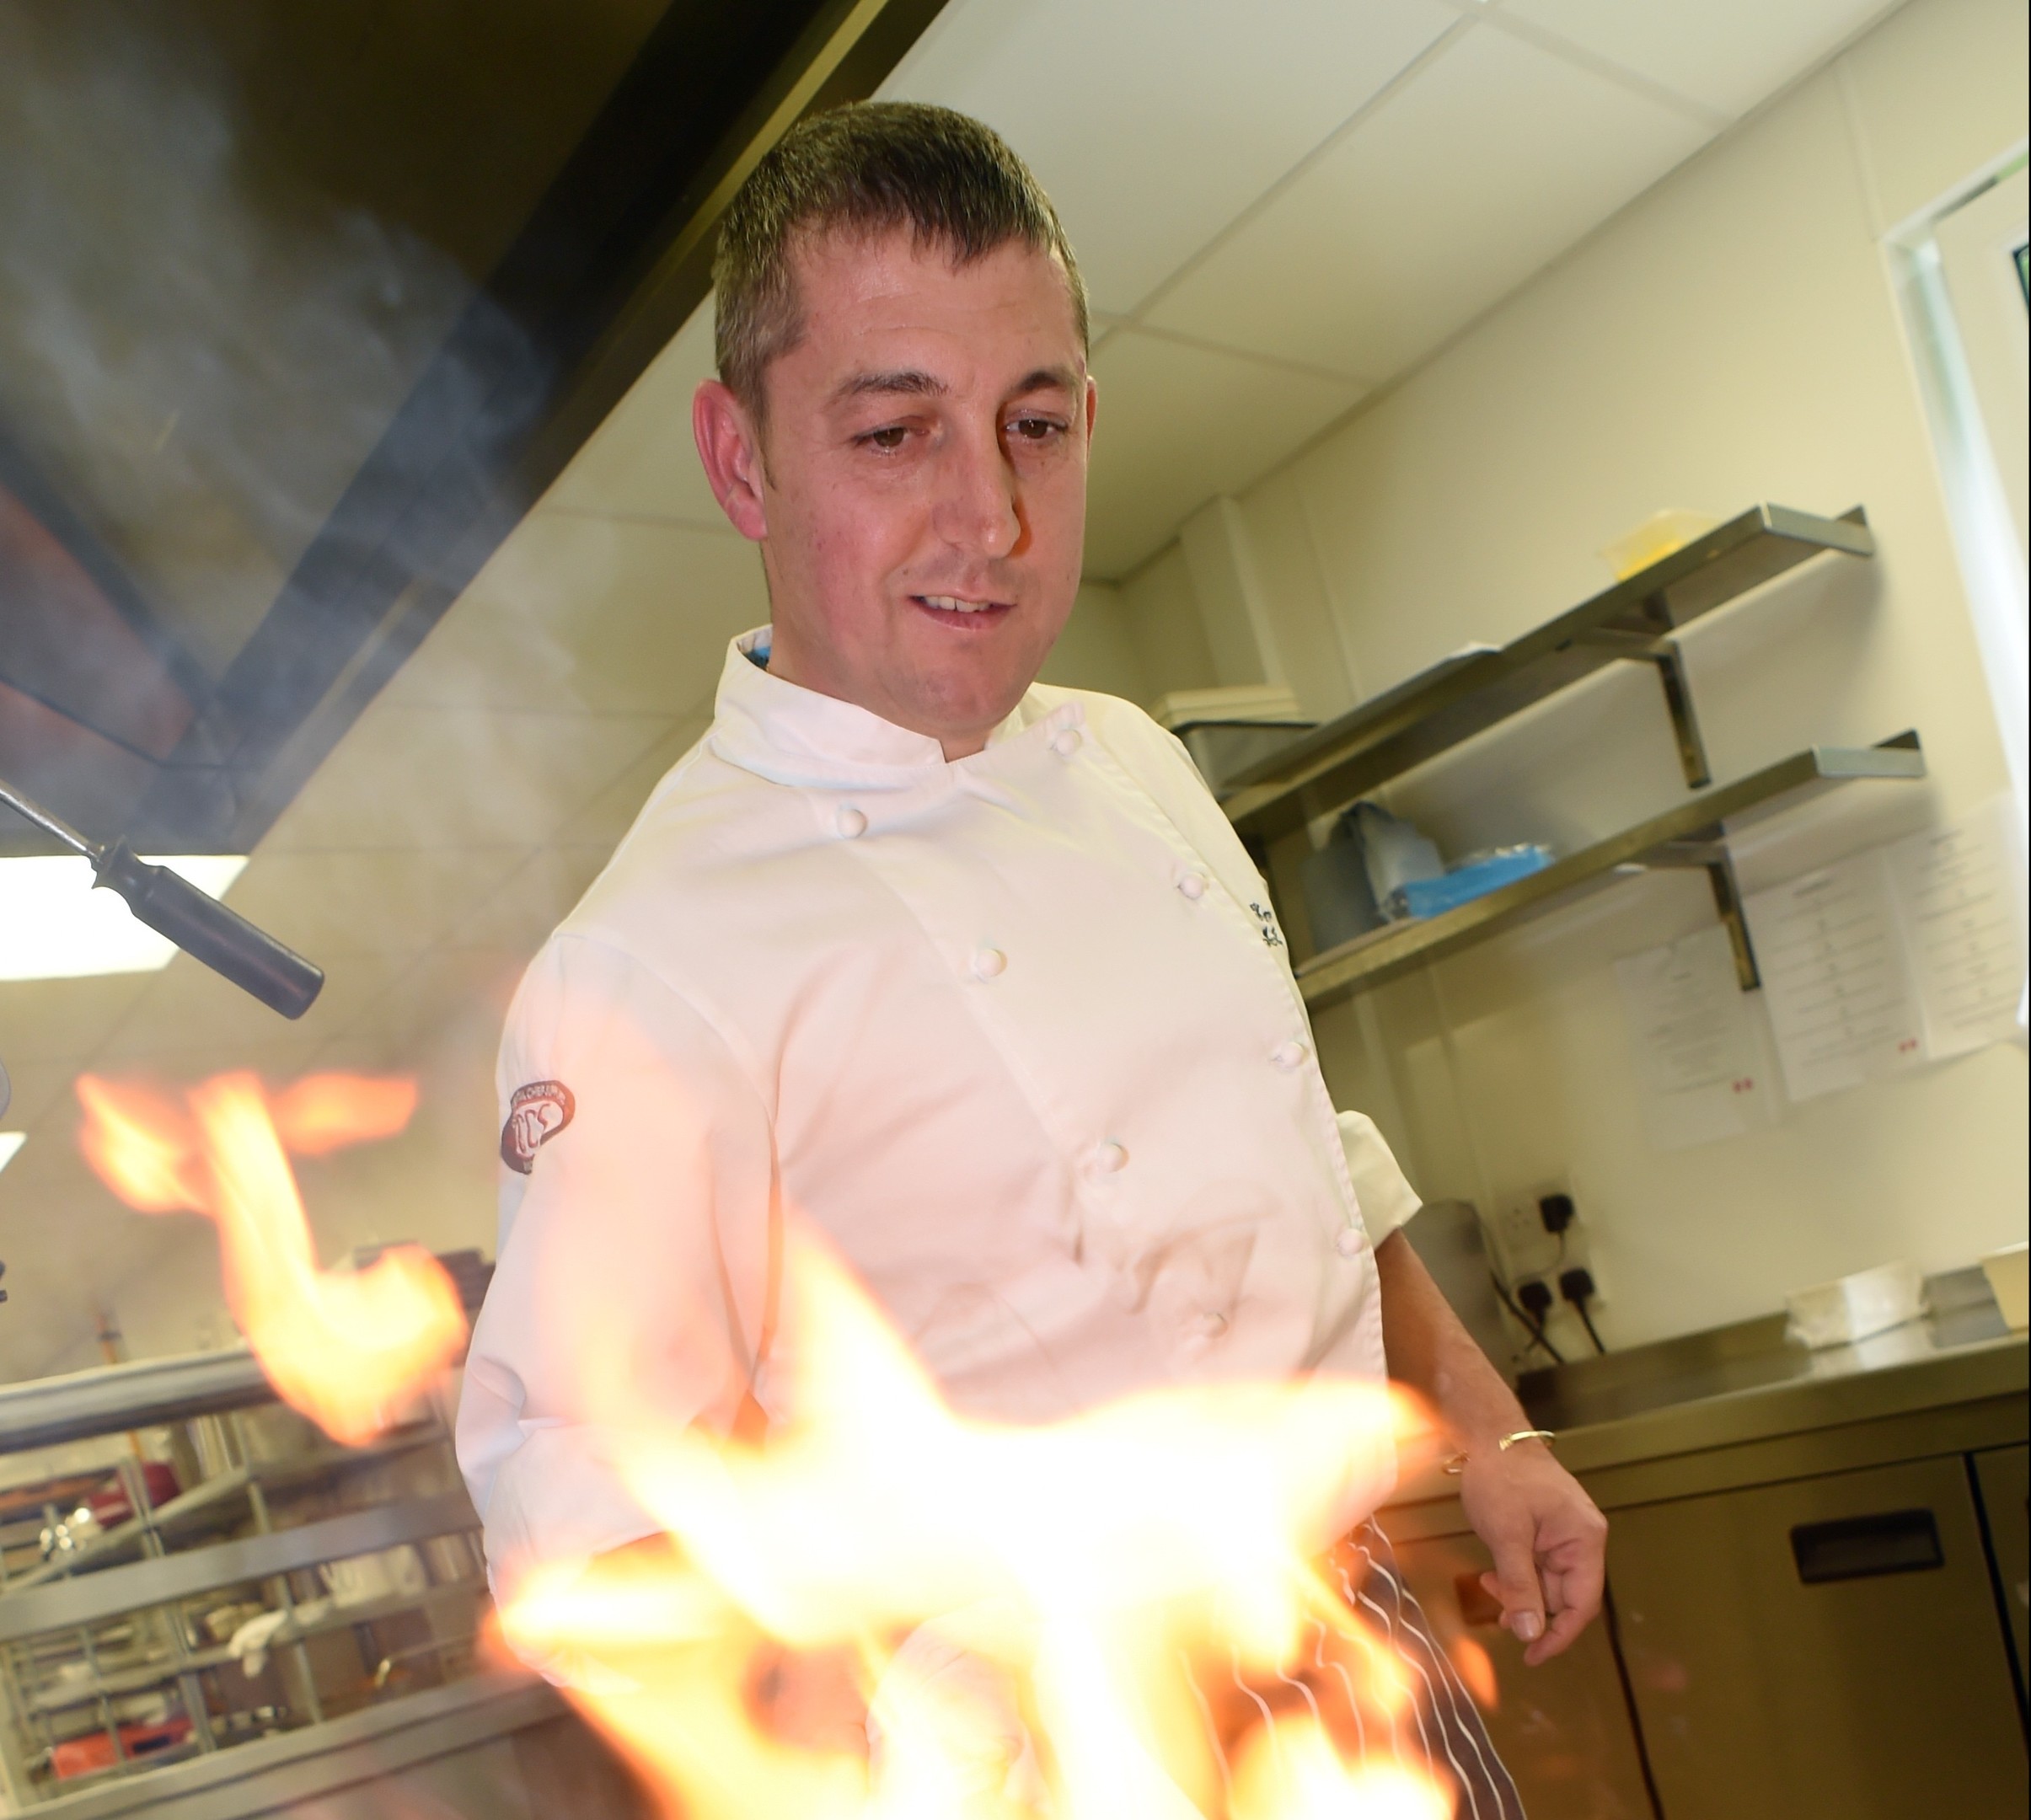 Kenny McMillan, Cluster Group Executive Chef with MacDonald Hotels, pictured at Norwood Hall Hotel, Aberdeen.